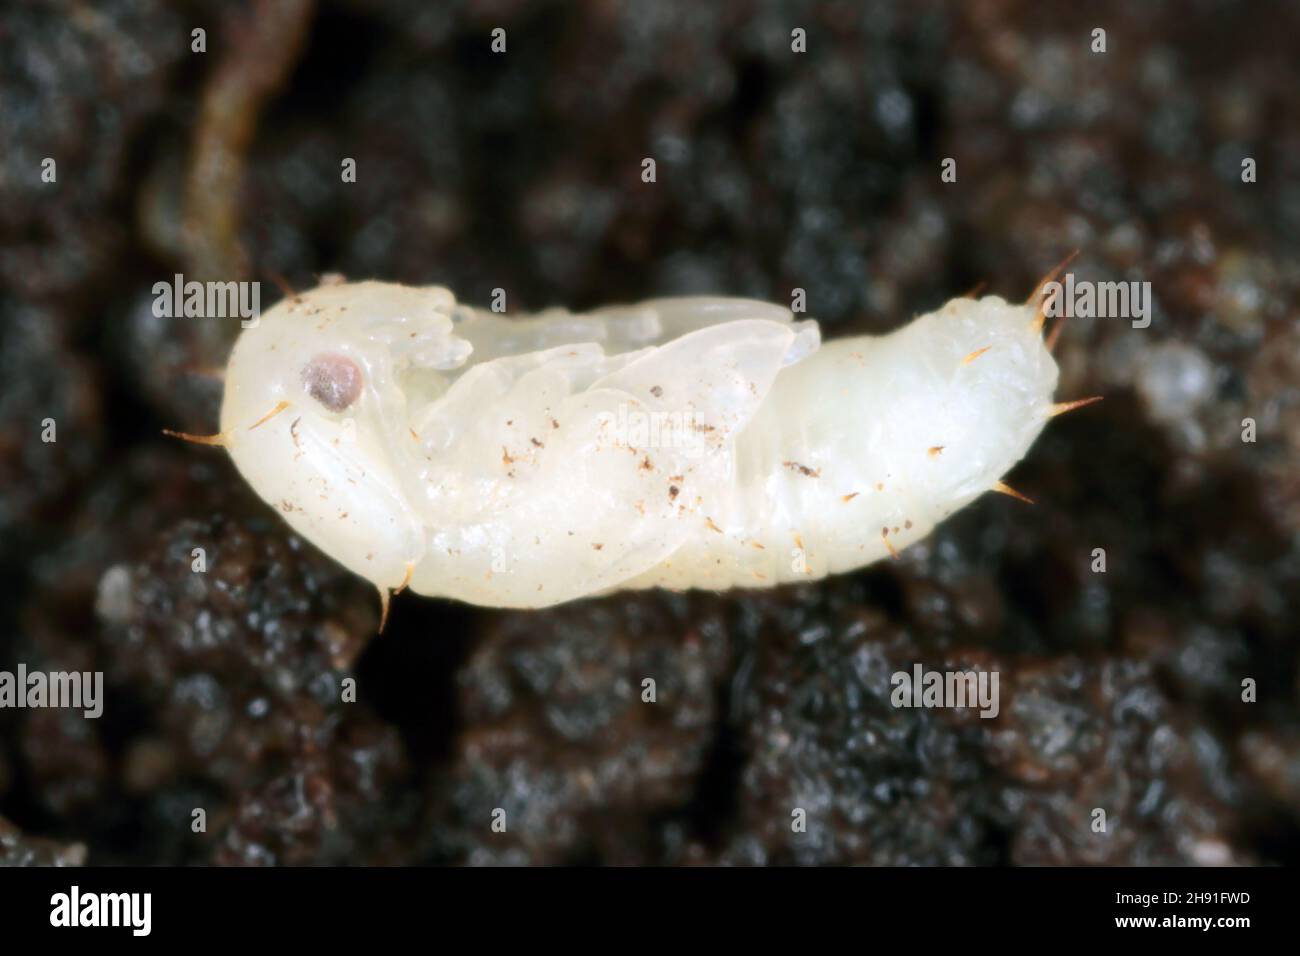 Pupa of Carpophilus hemipterus (dried fruit beetle) is a species of sap-feeding beetle in the family Nitidulidae. It is a pest of ripe and dried fruit Stock Photo